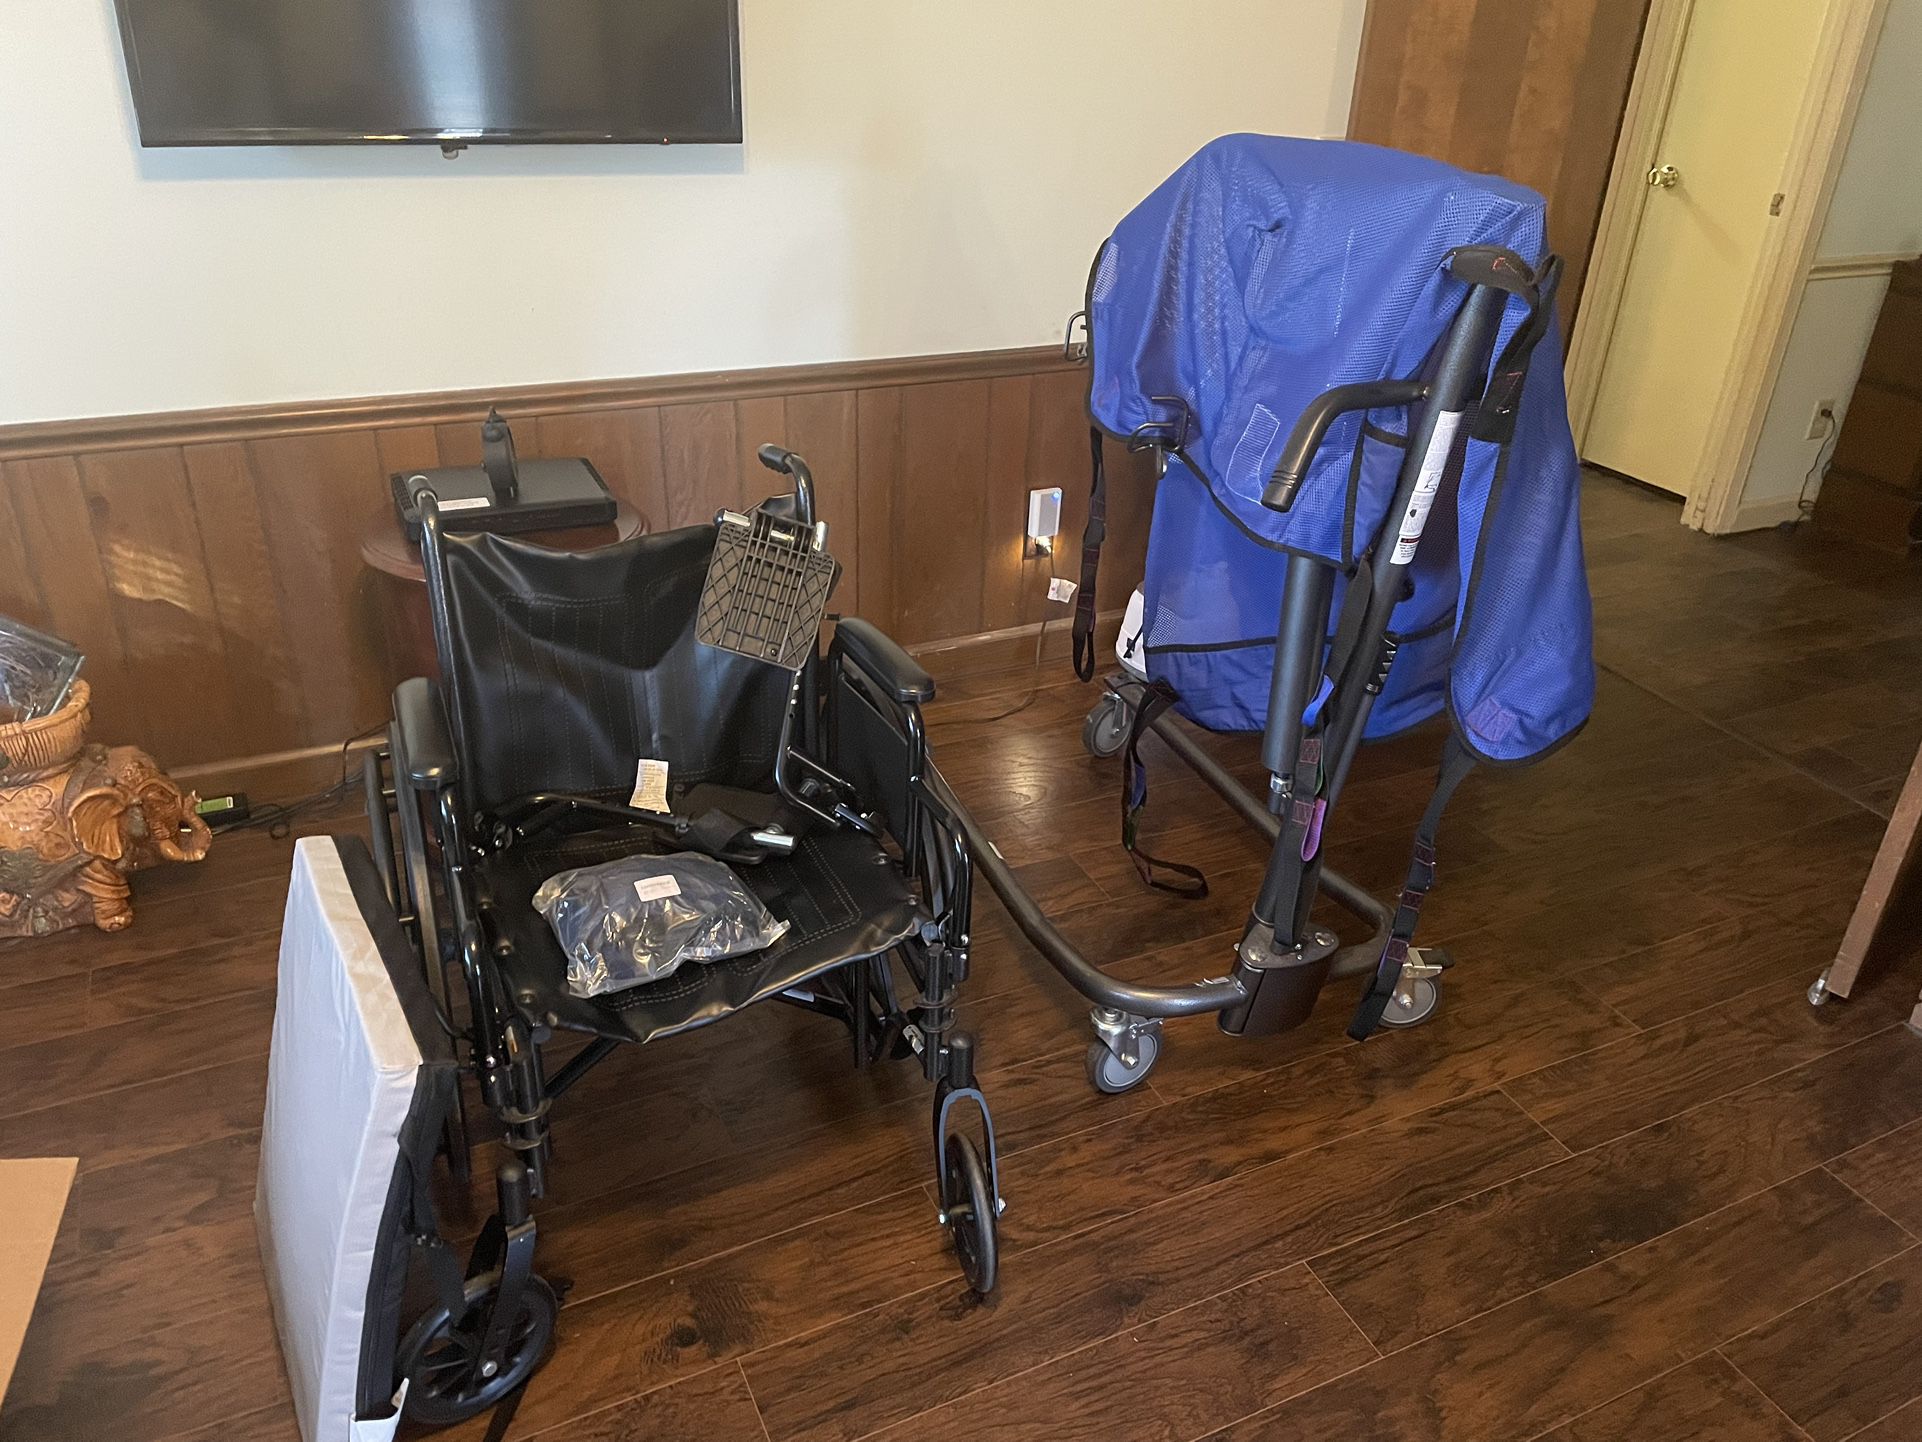 Extra large Wheelchair And Walker